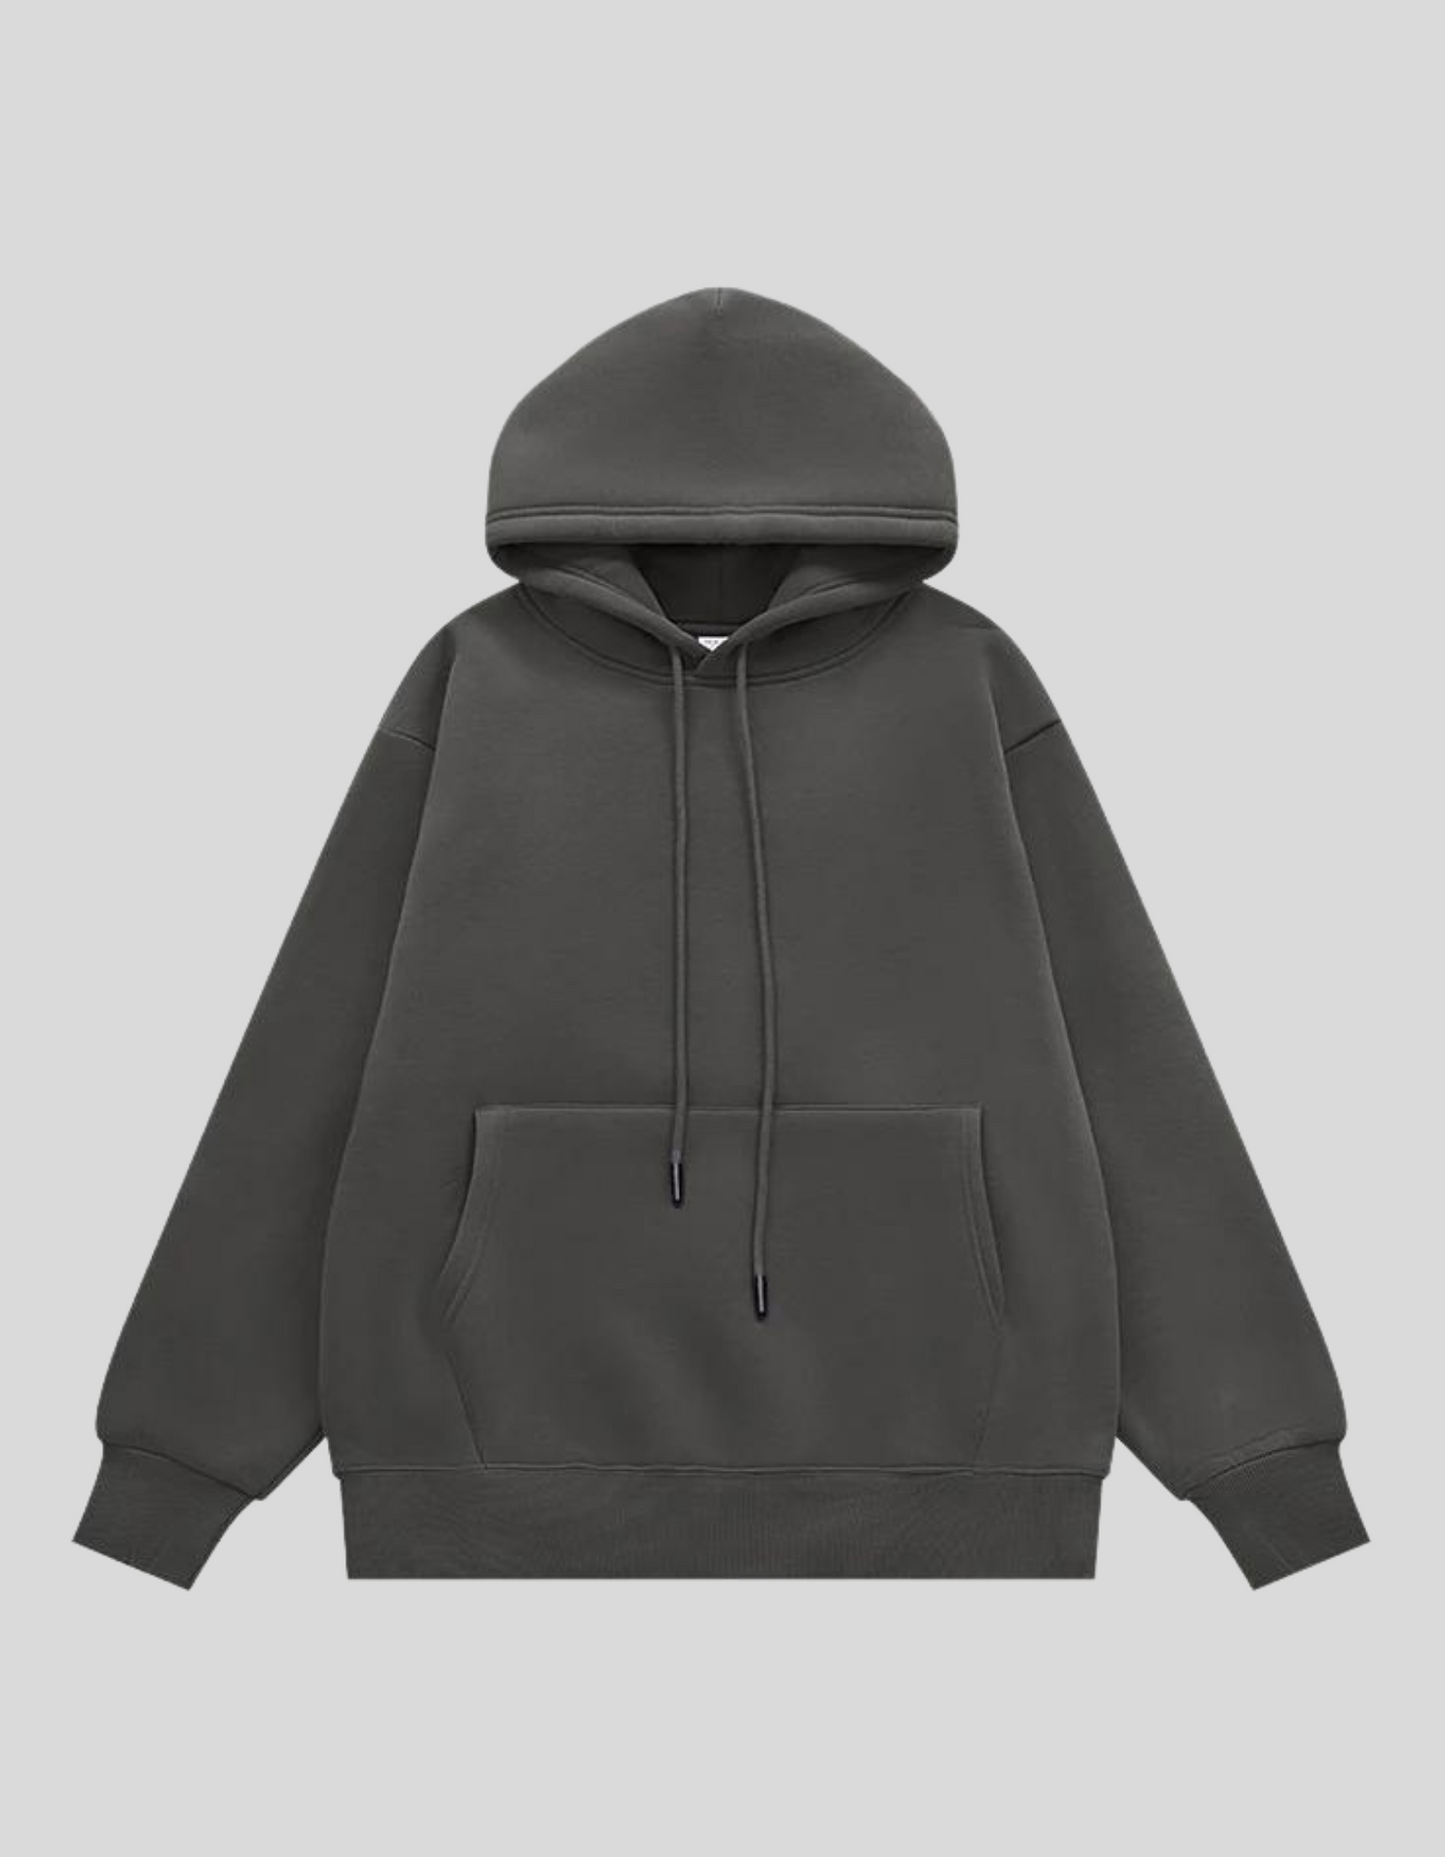 INFLATION 350gsm Thick Velvet Unisex Hoodies | Charcoal, Red